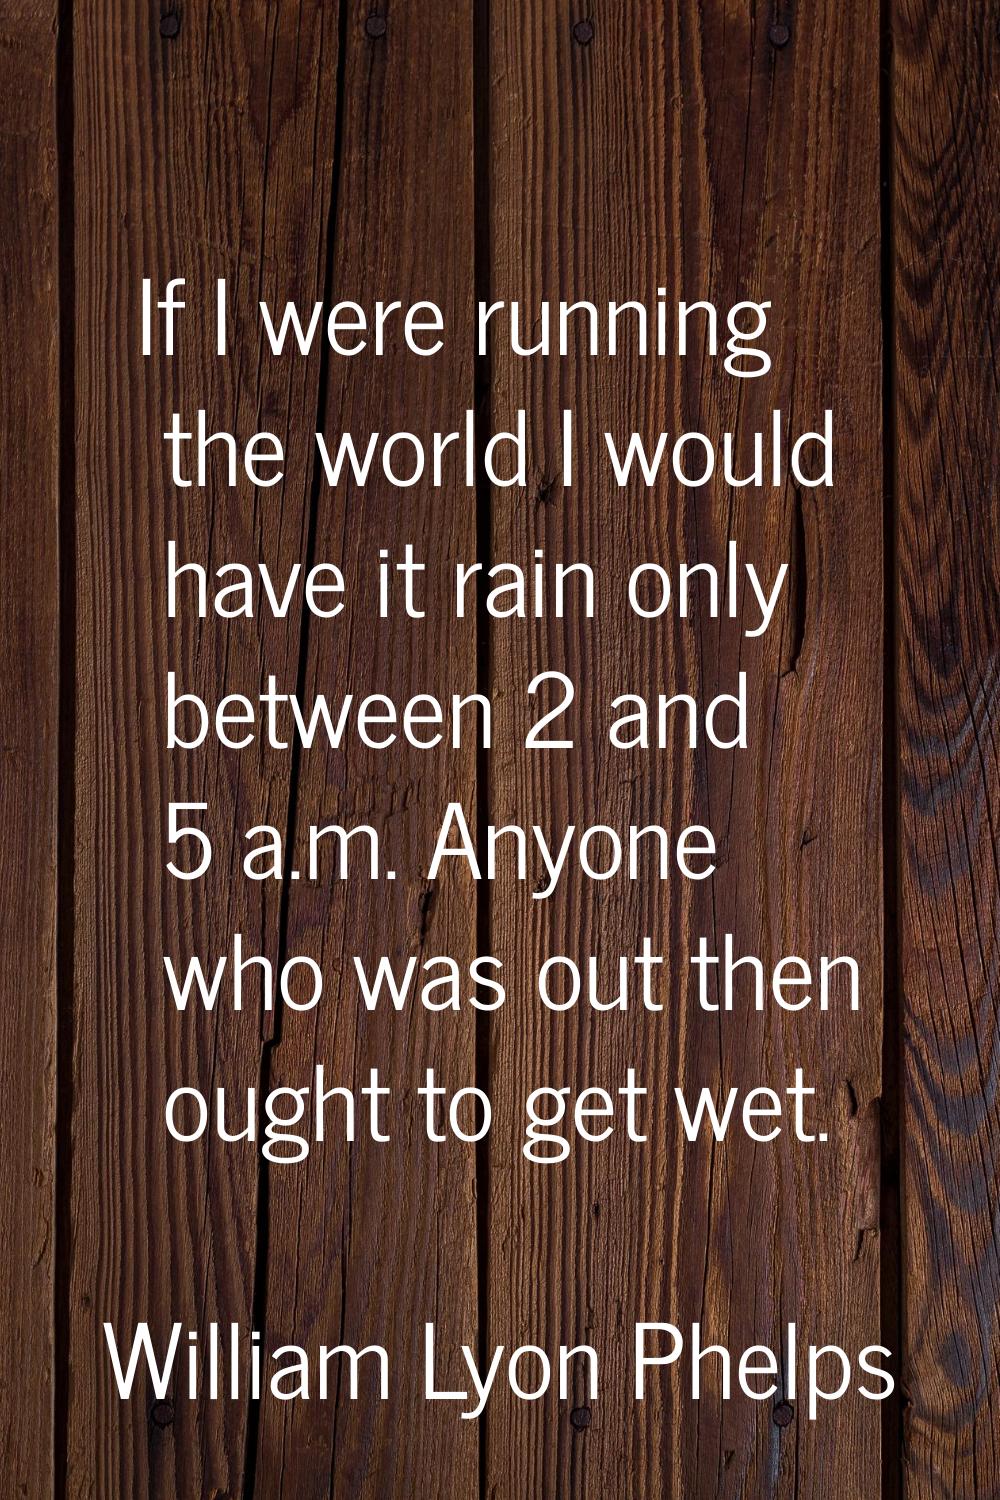 If I were running the world I would have it rain only between 2 and 5 a.m. Anyone who was out then 